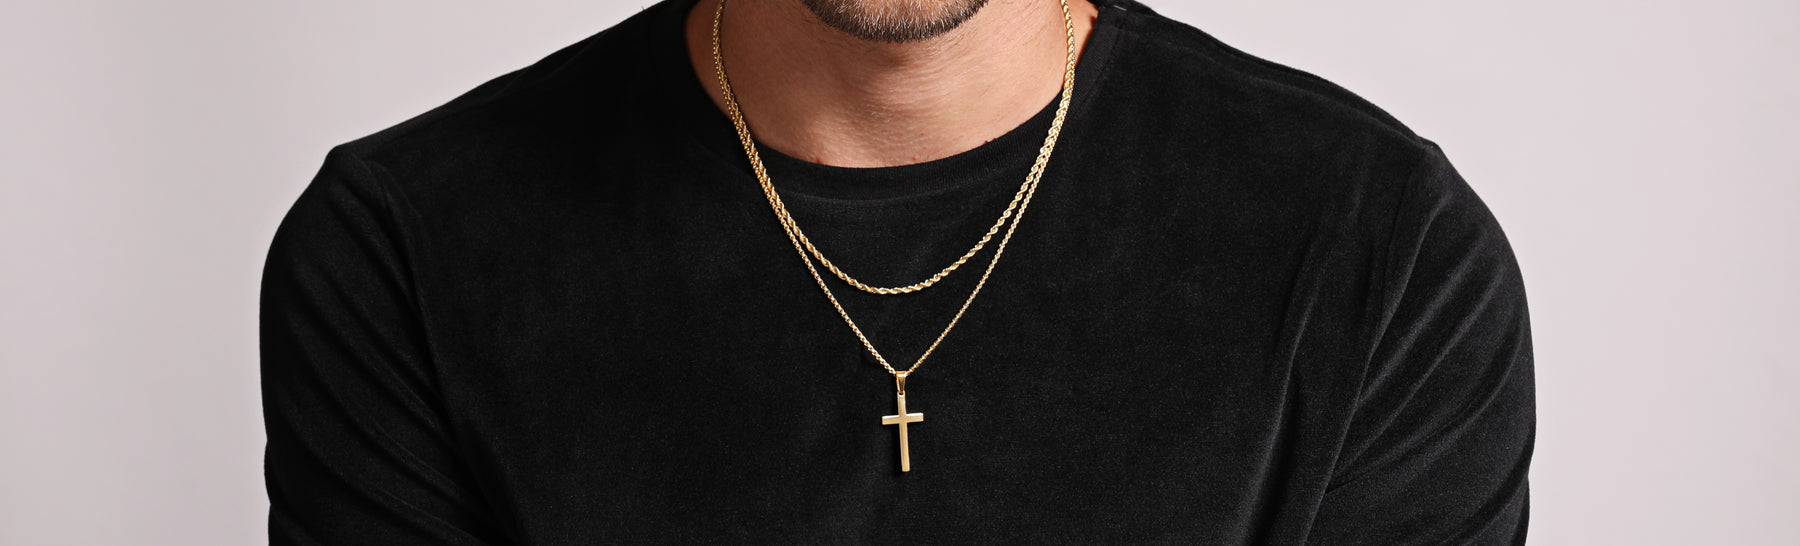 Get this look (Rope Chain Necklace & Gold Cross Necklace)